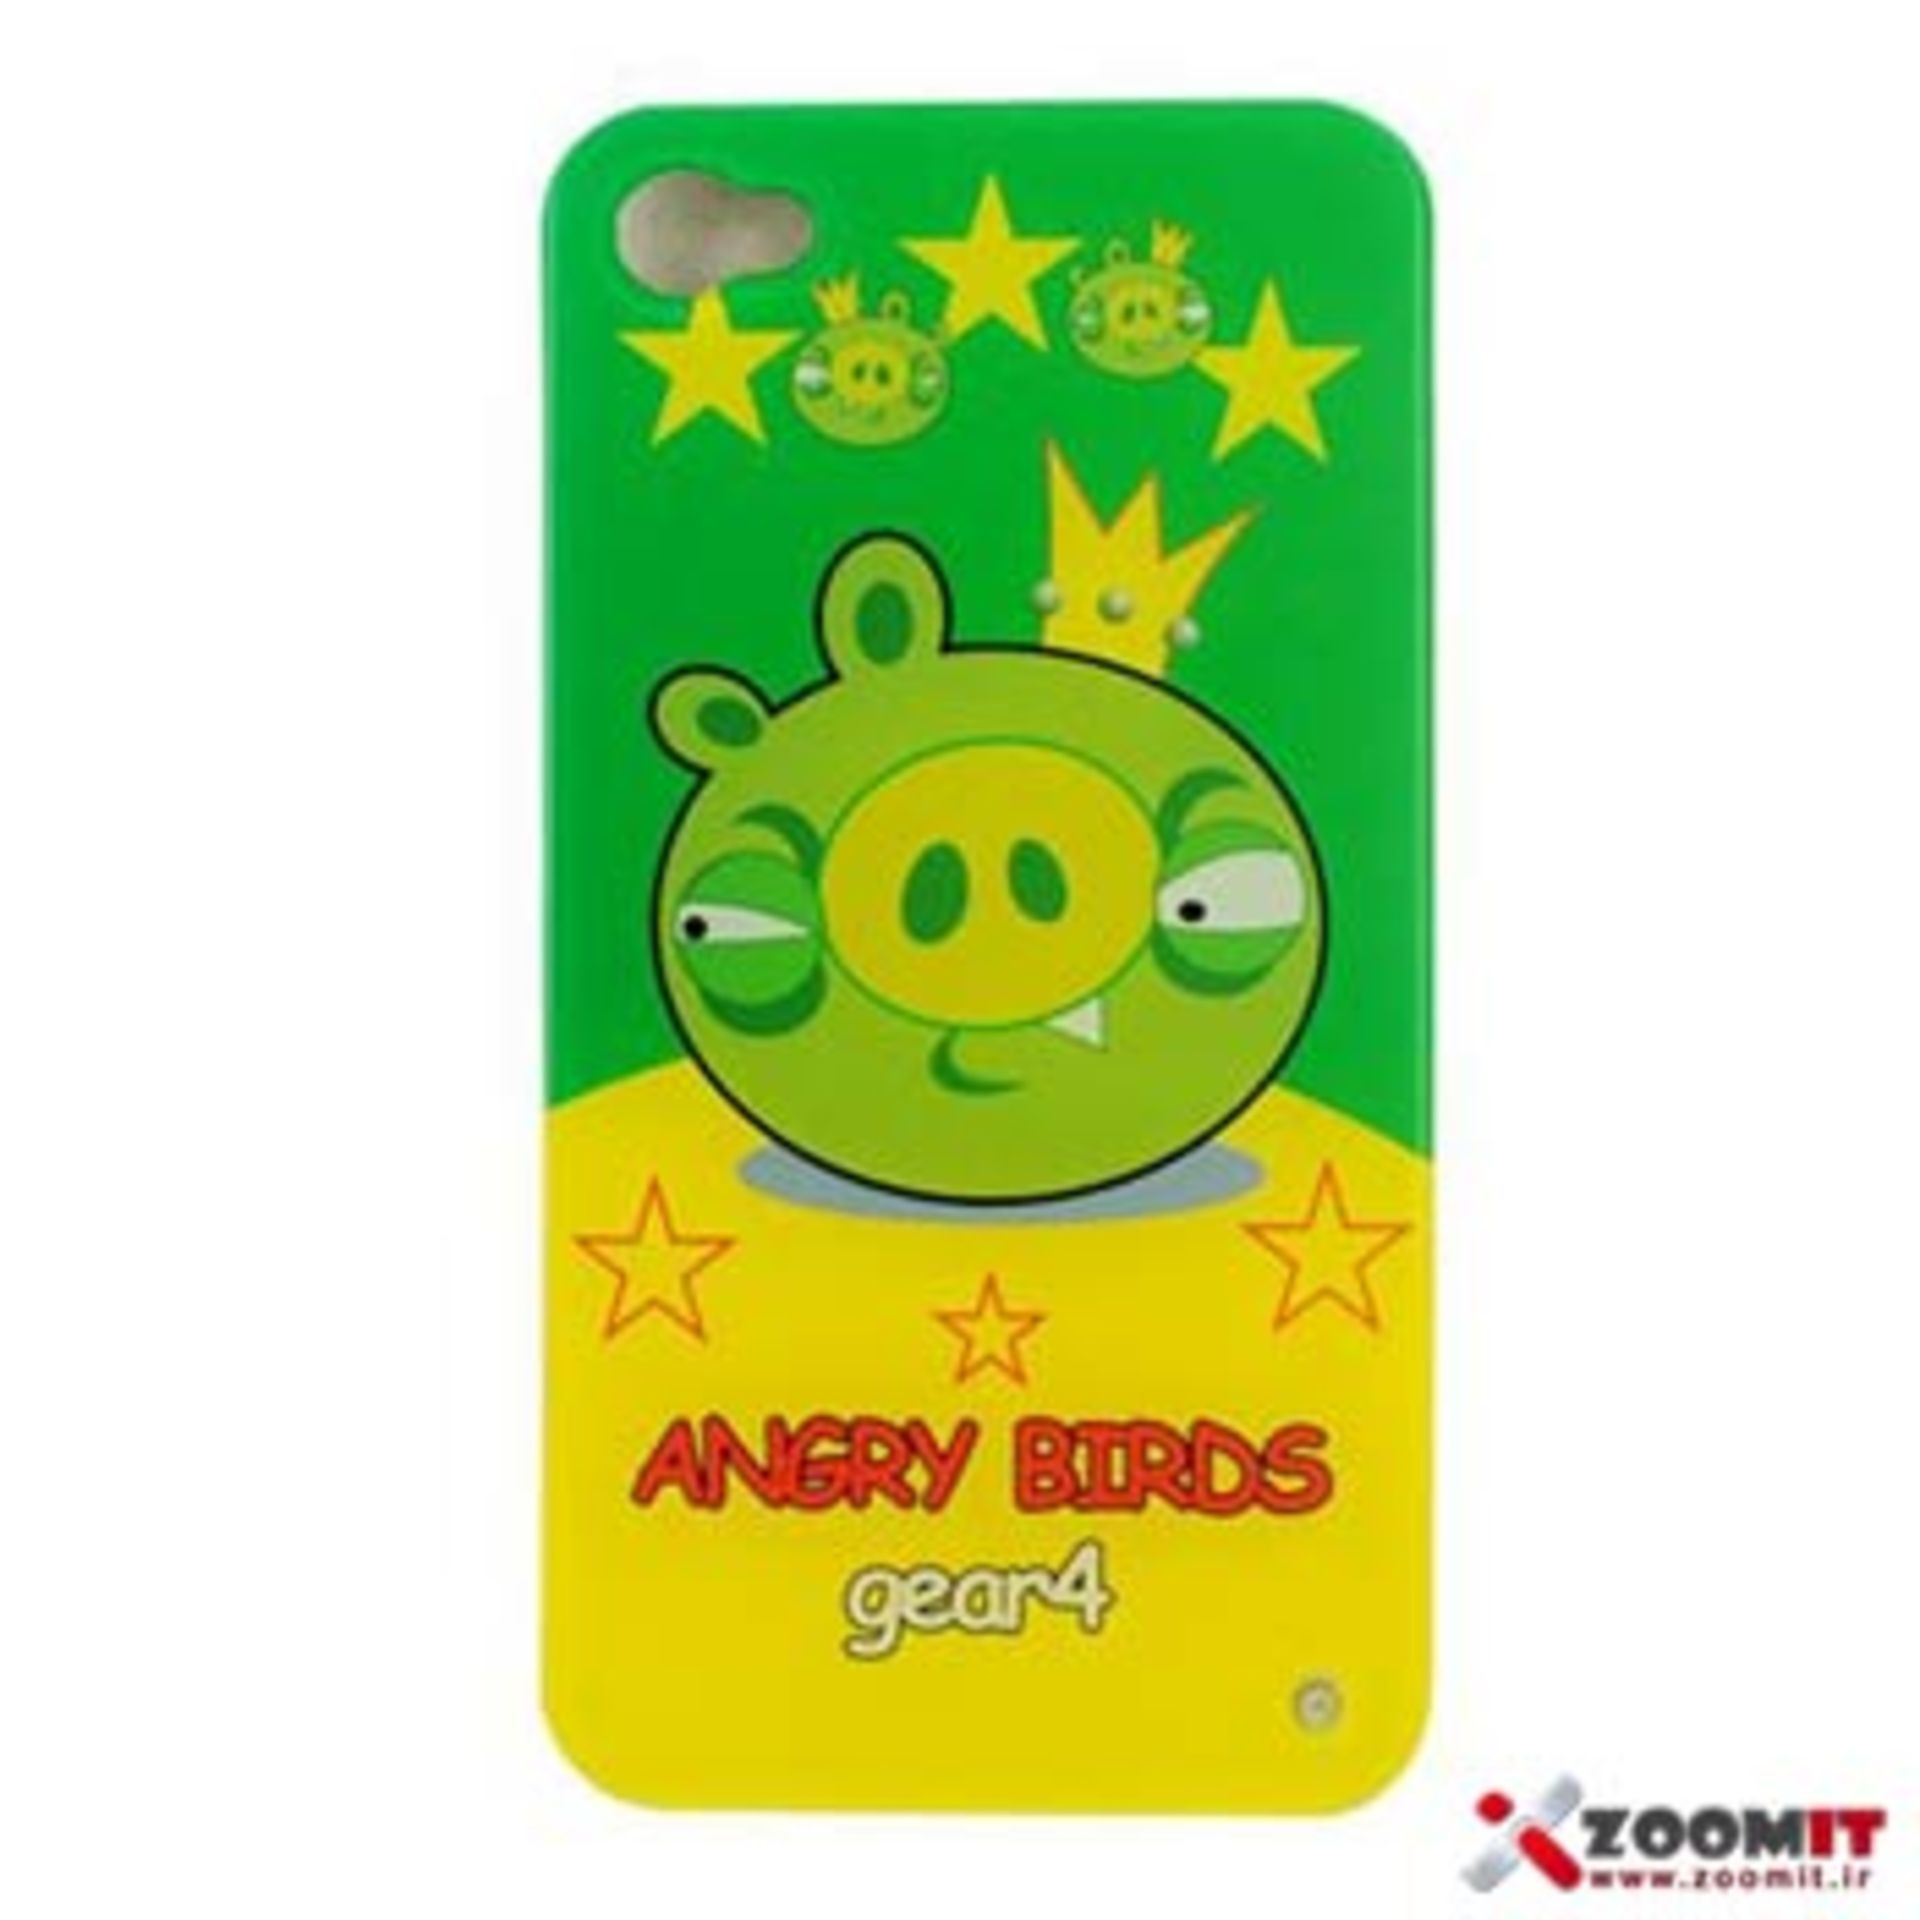 angry_birds_pattern_protective_back_case_for_iphone_4g_9__27378